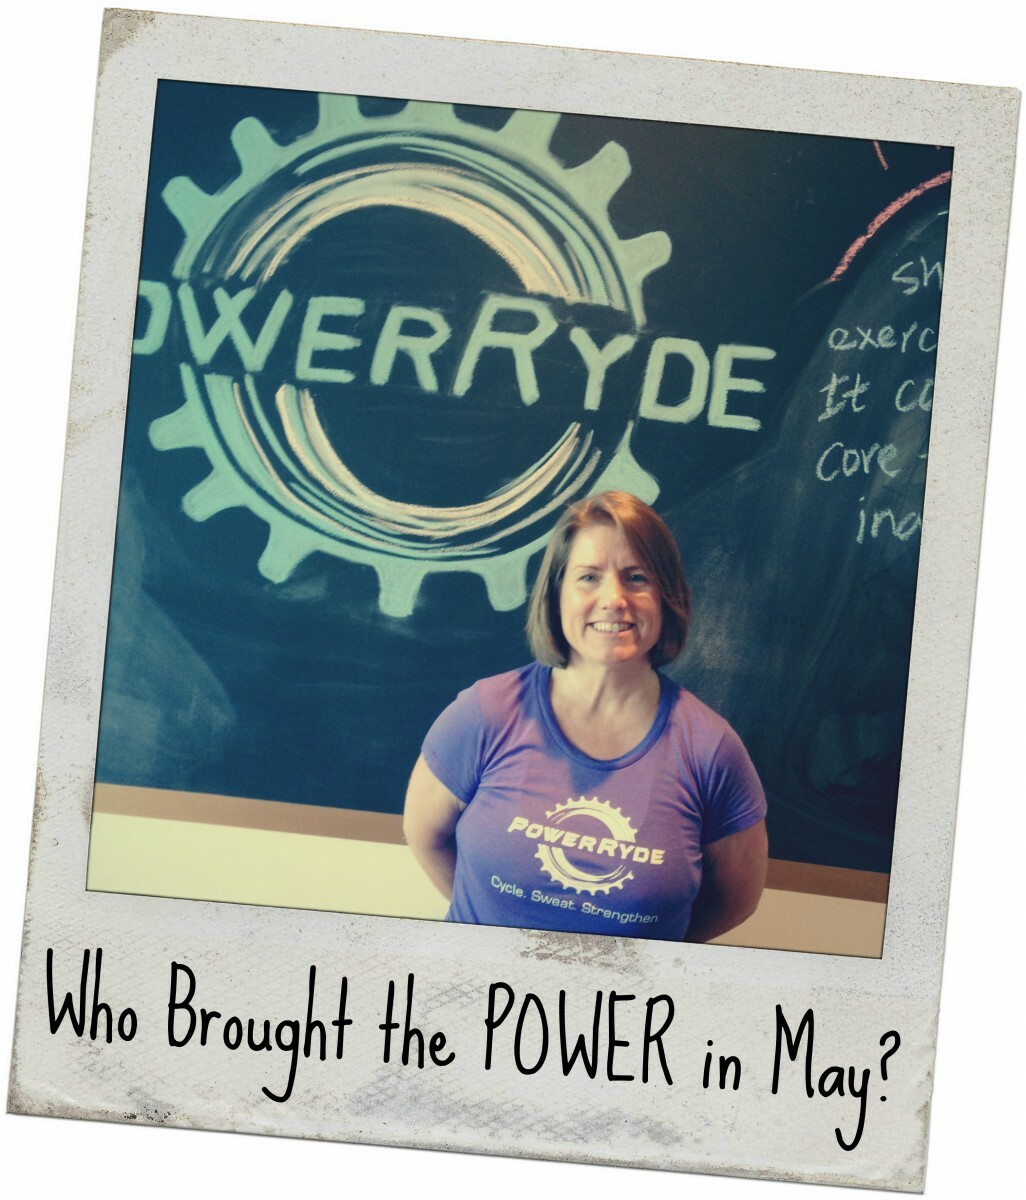 Polaroid style picture of Lauren Aiello with 'Who Brought the POWER in 'May'?